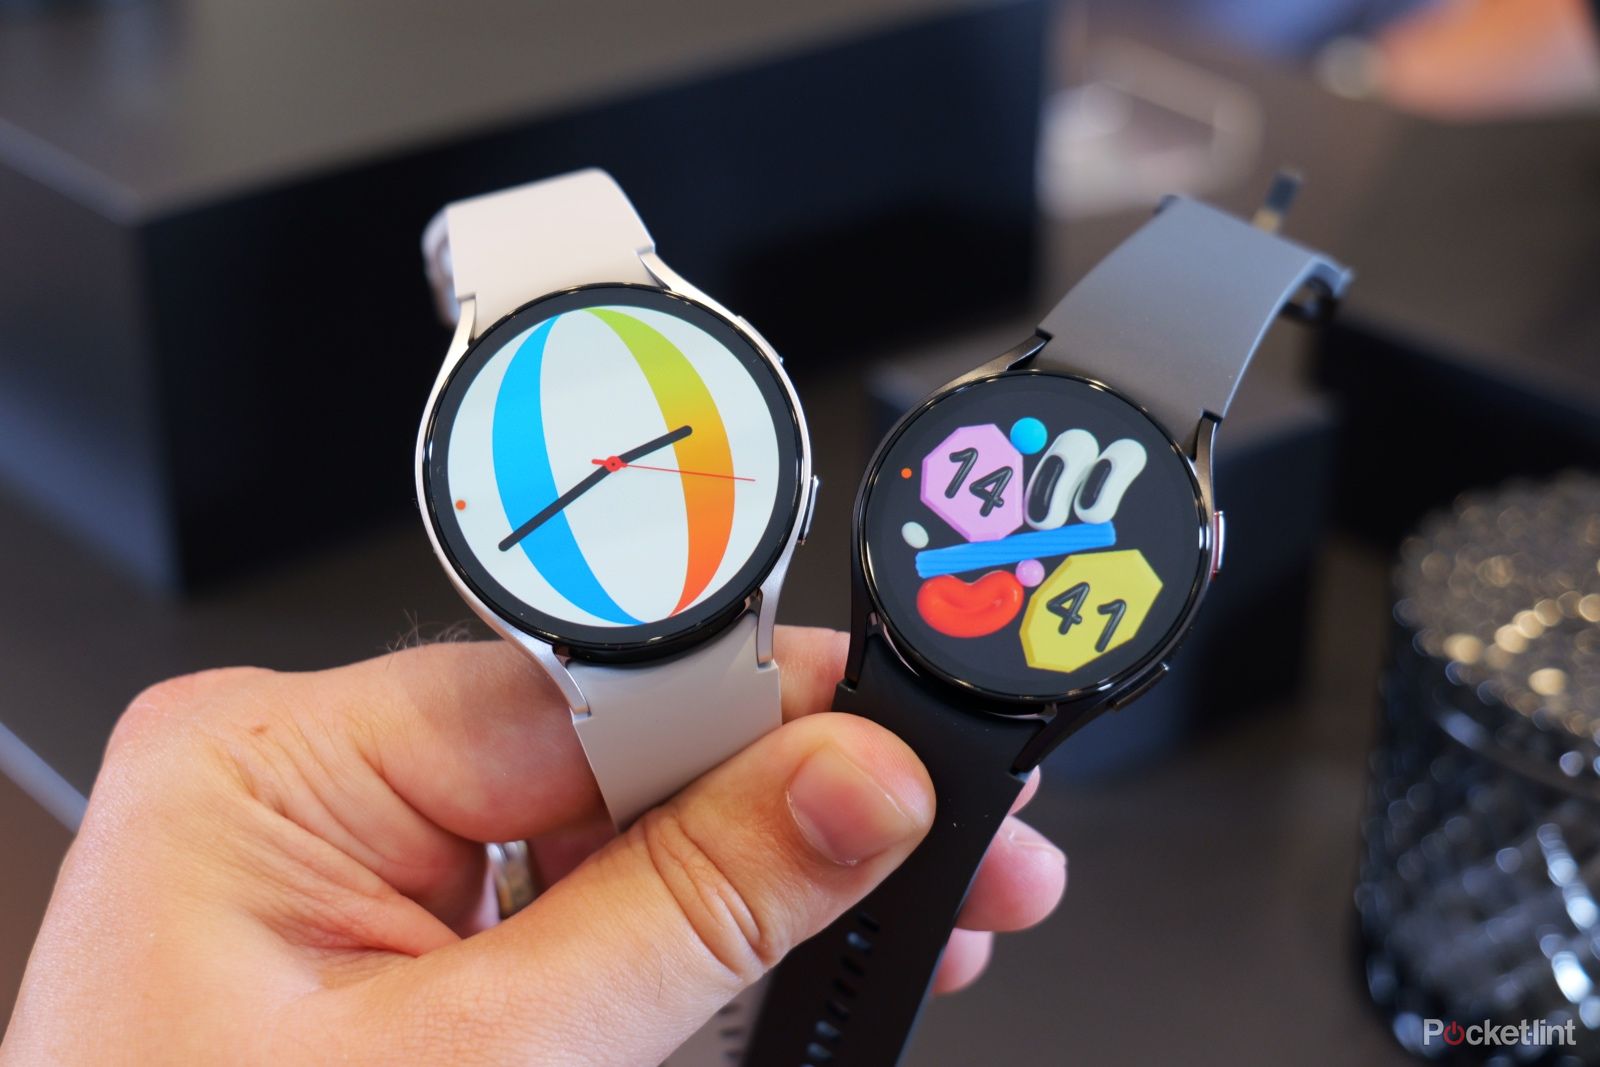 Samsung Galaxy Watch 5 vs Galaxy Watch 6 - Android Authority